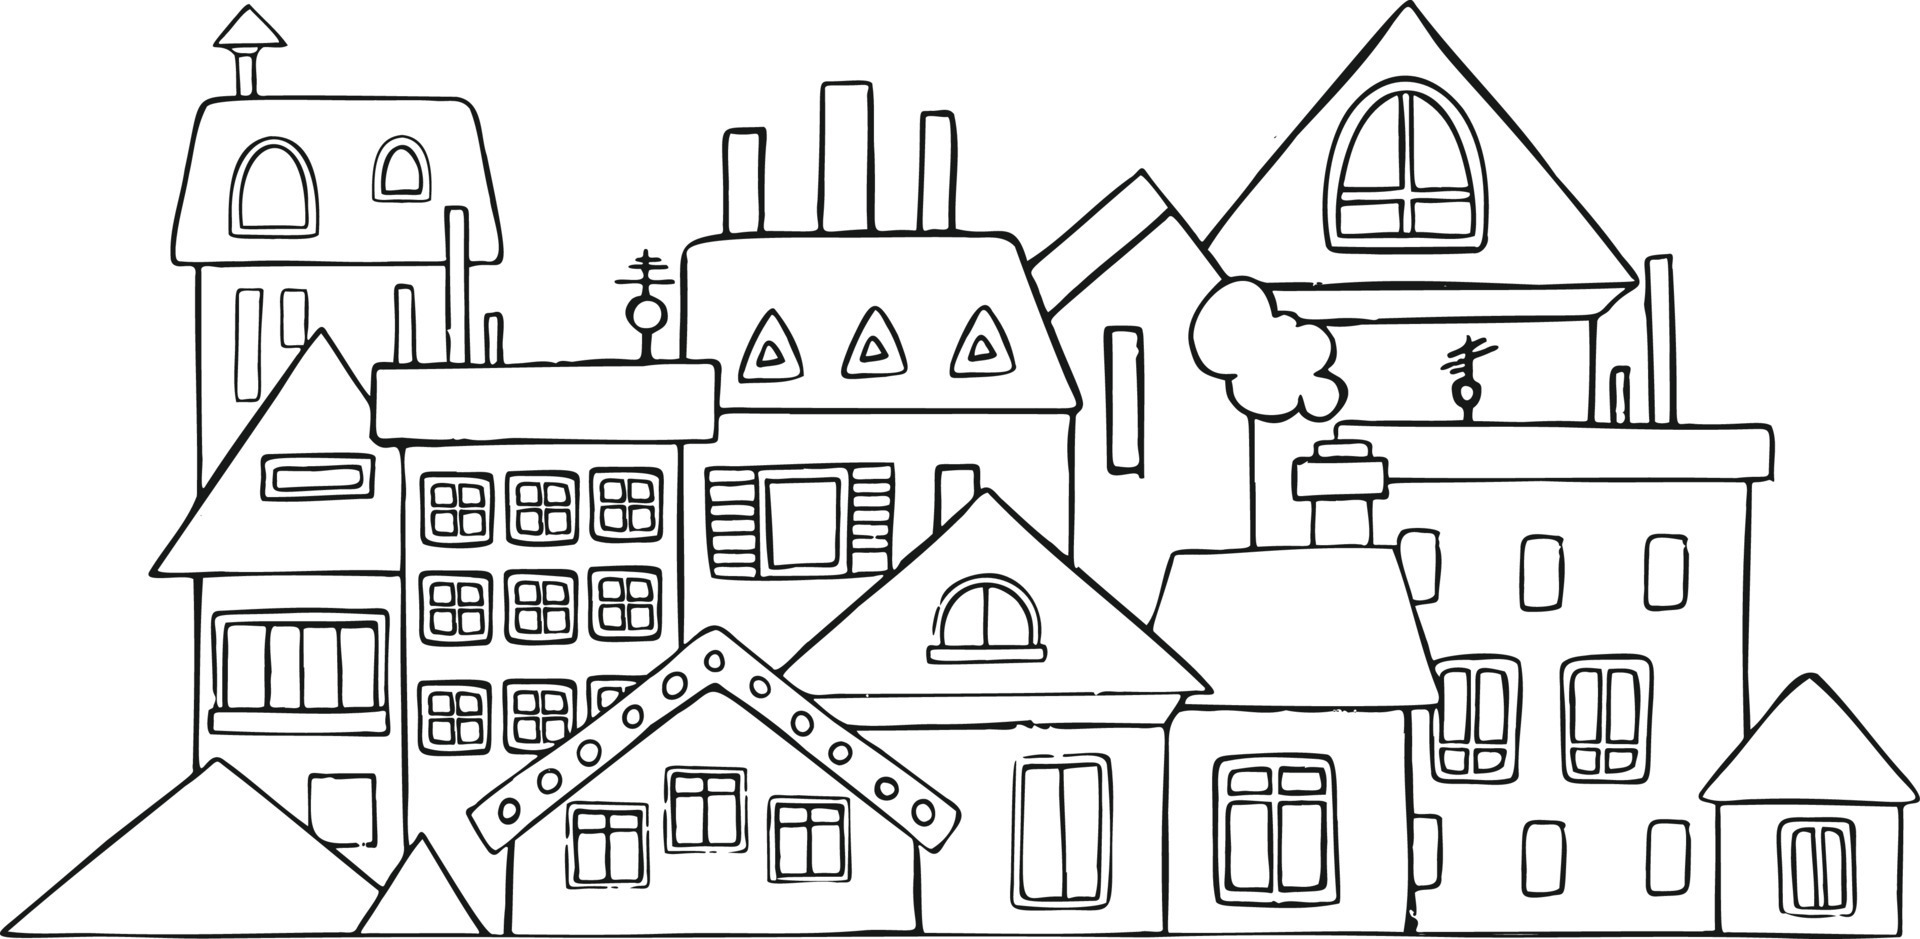 City, Town and Countryside Illustration in Linear Style - buildings ...